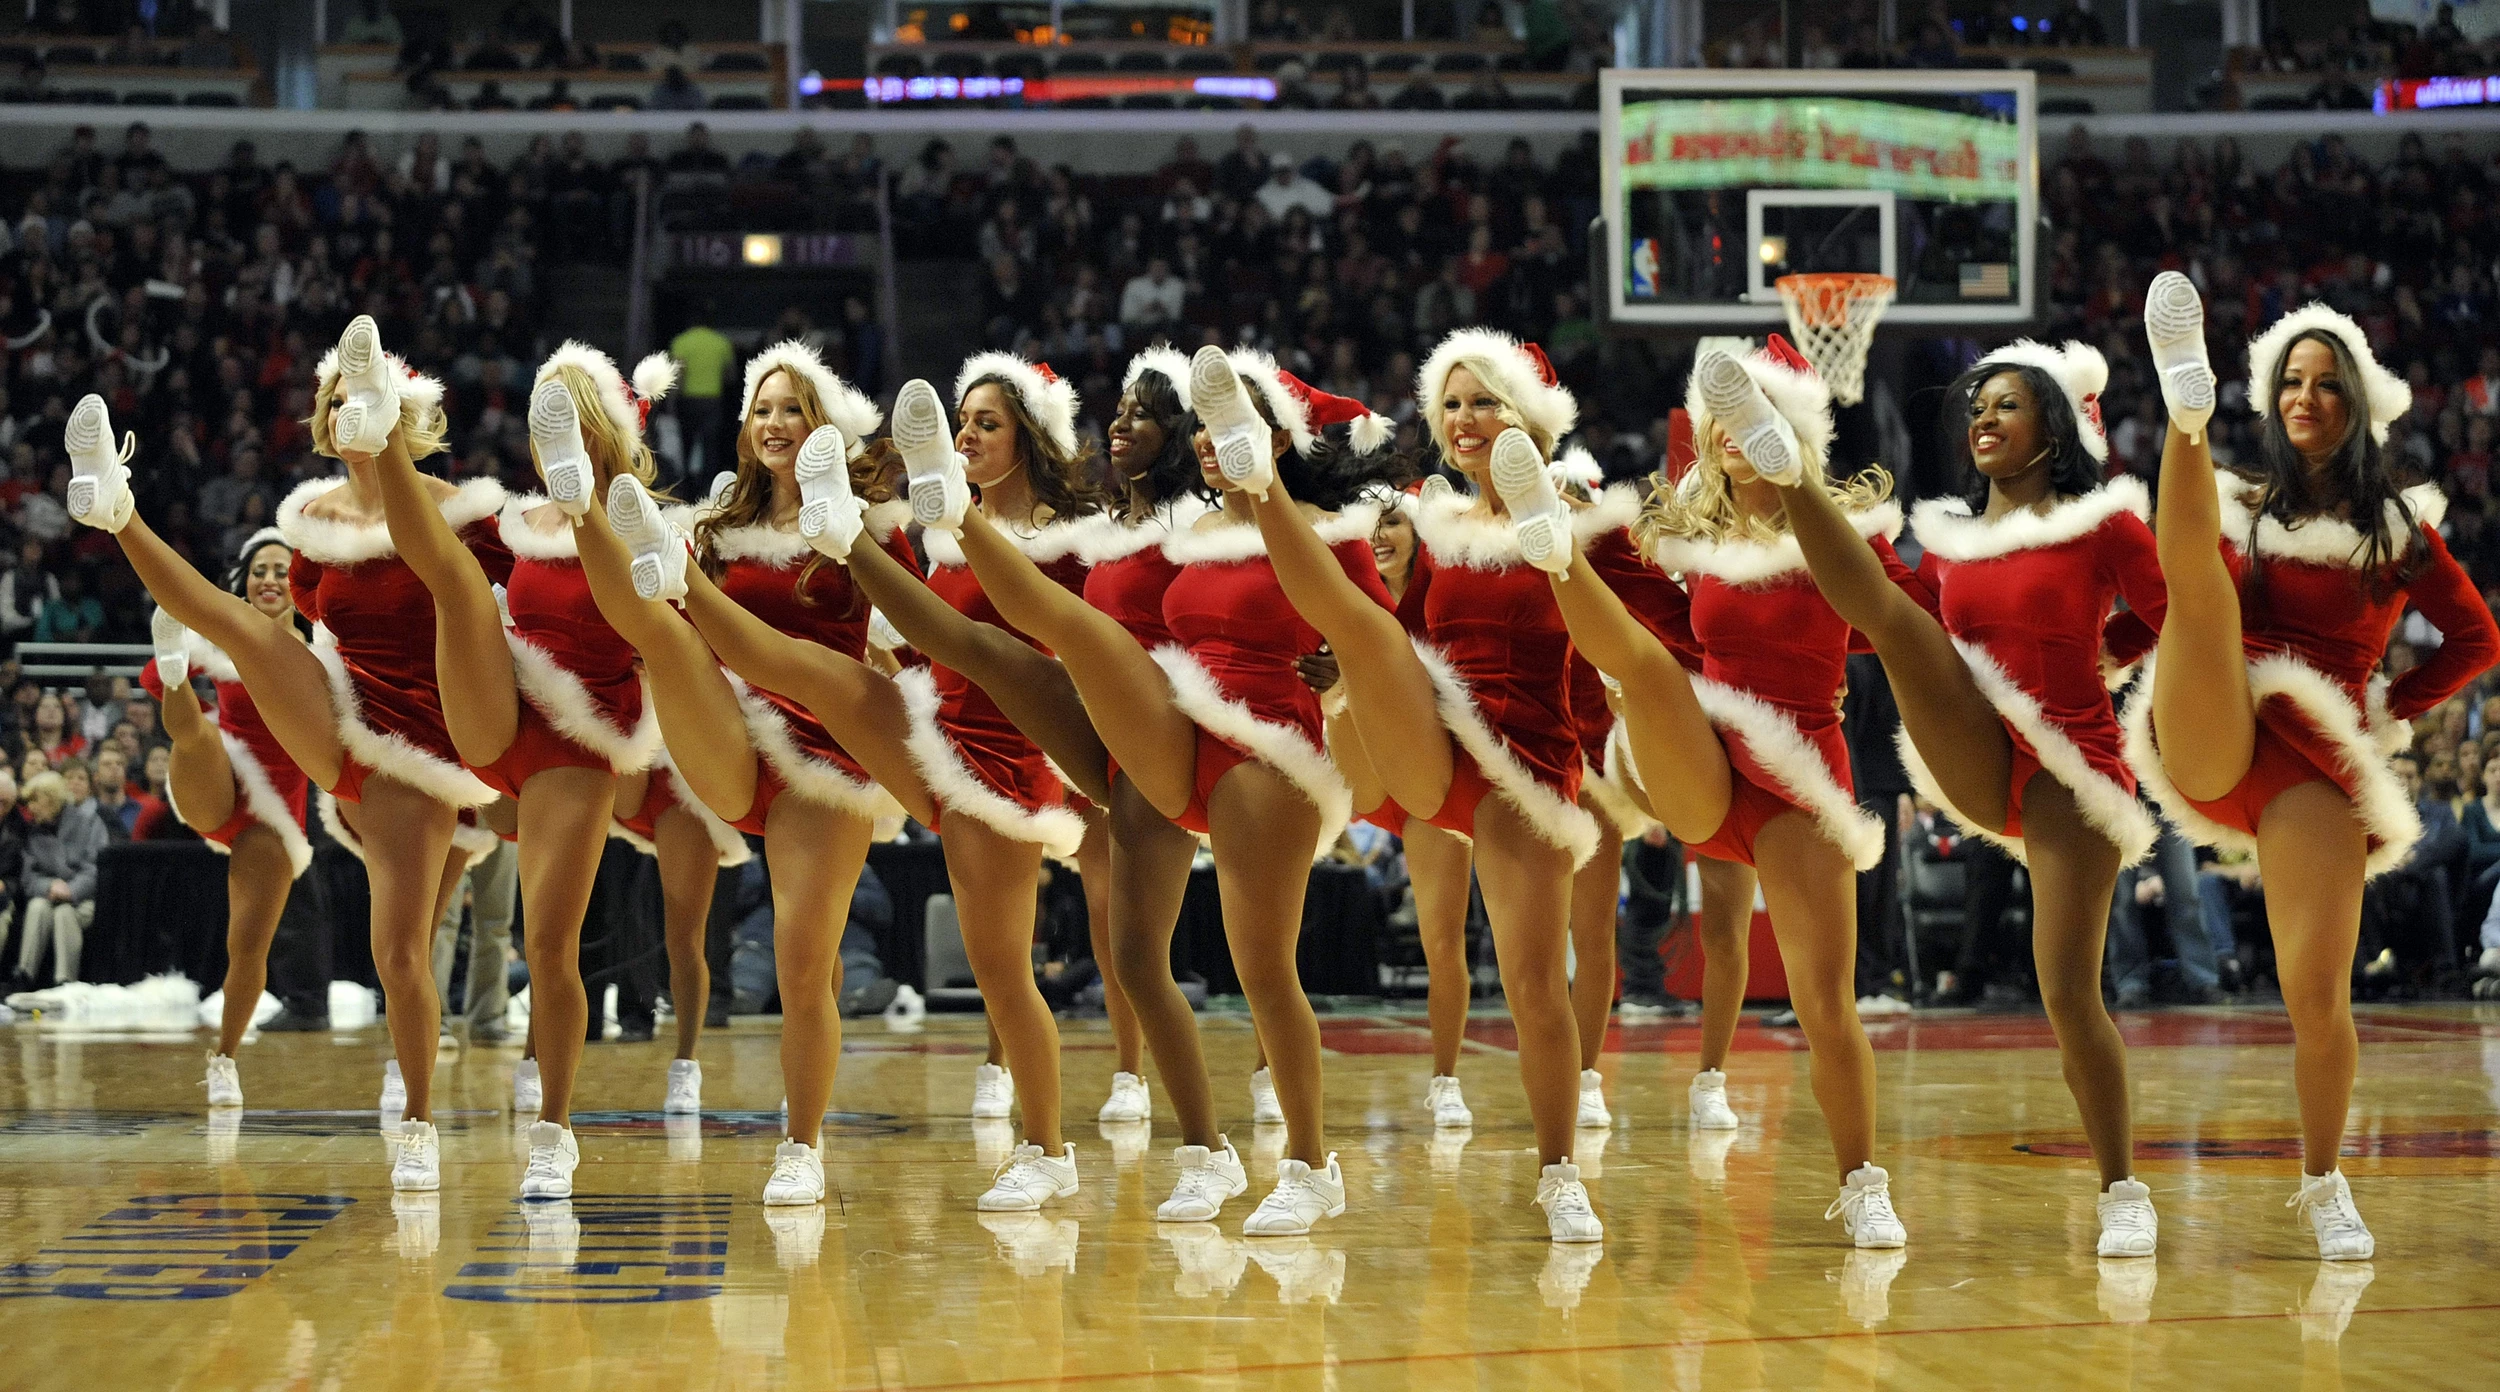 NBA Christmas Day Schedule 2013: Complete Viewer's Guide to